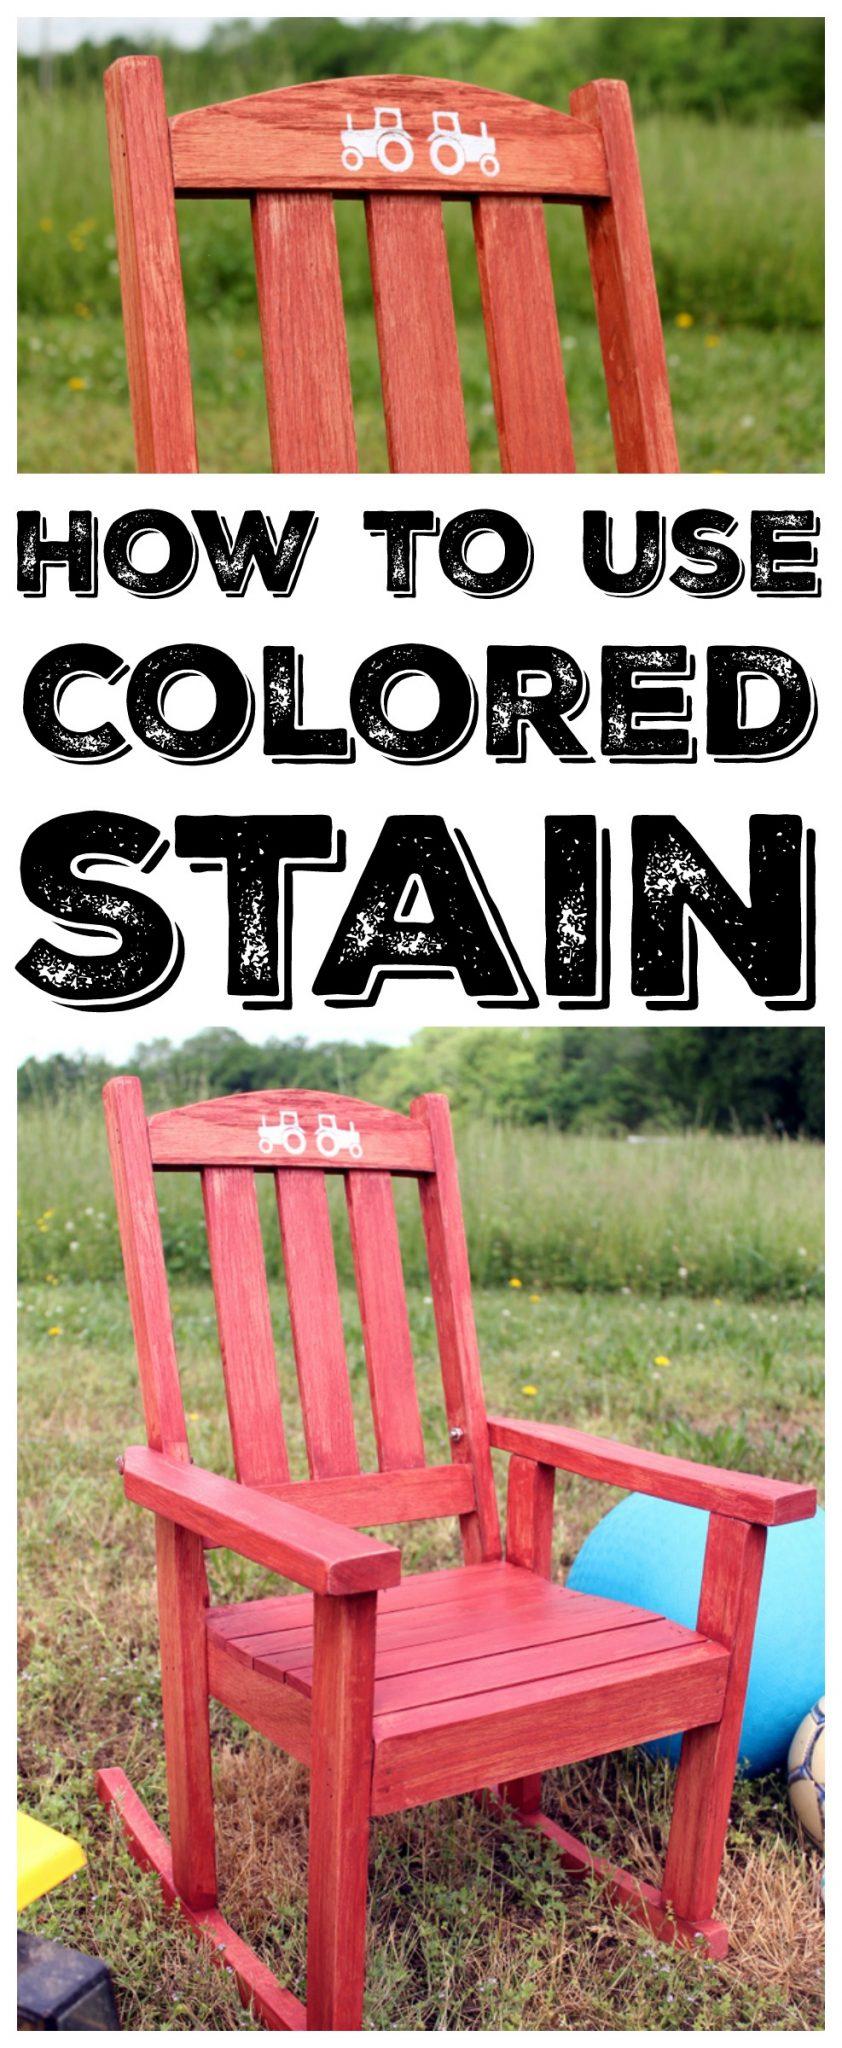 How to Use Colored Stain - Angie Holden The Country Chic Cottage